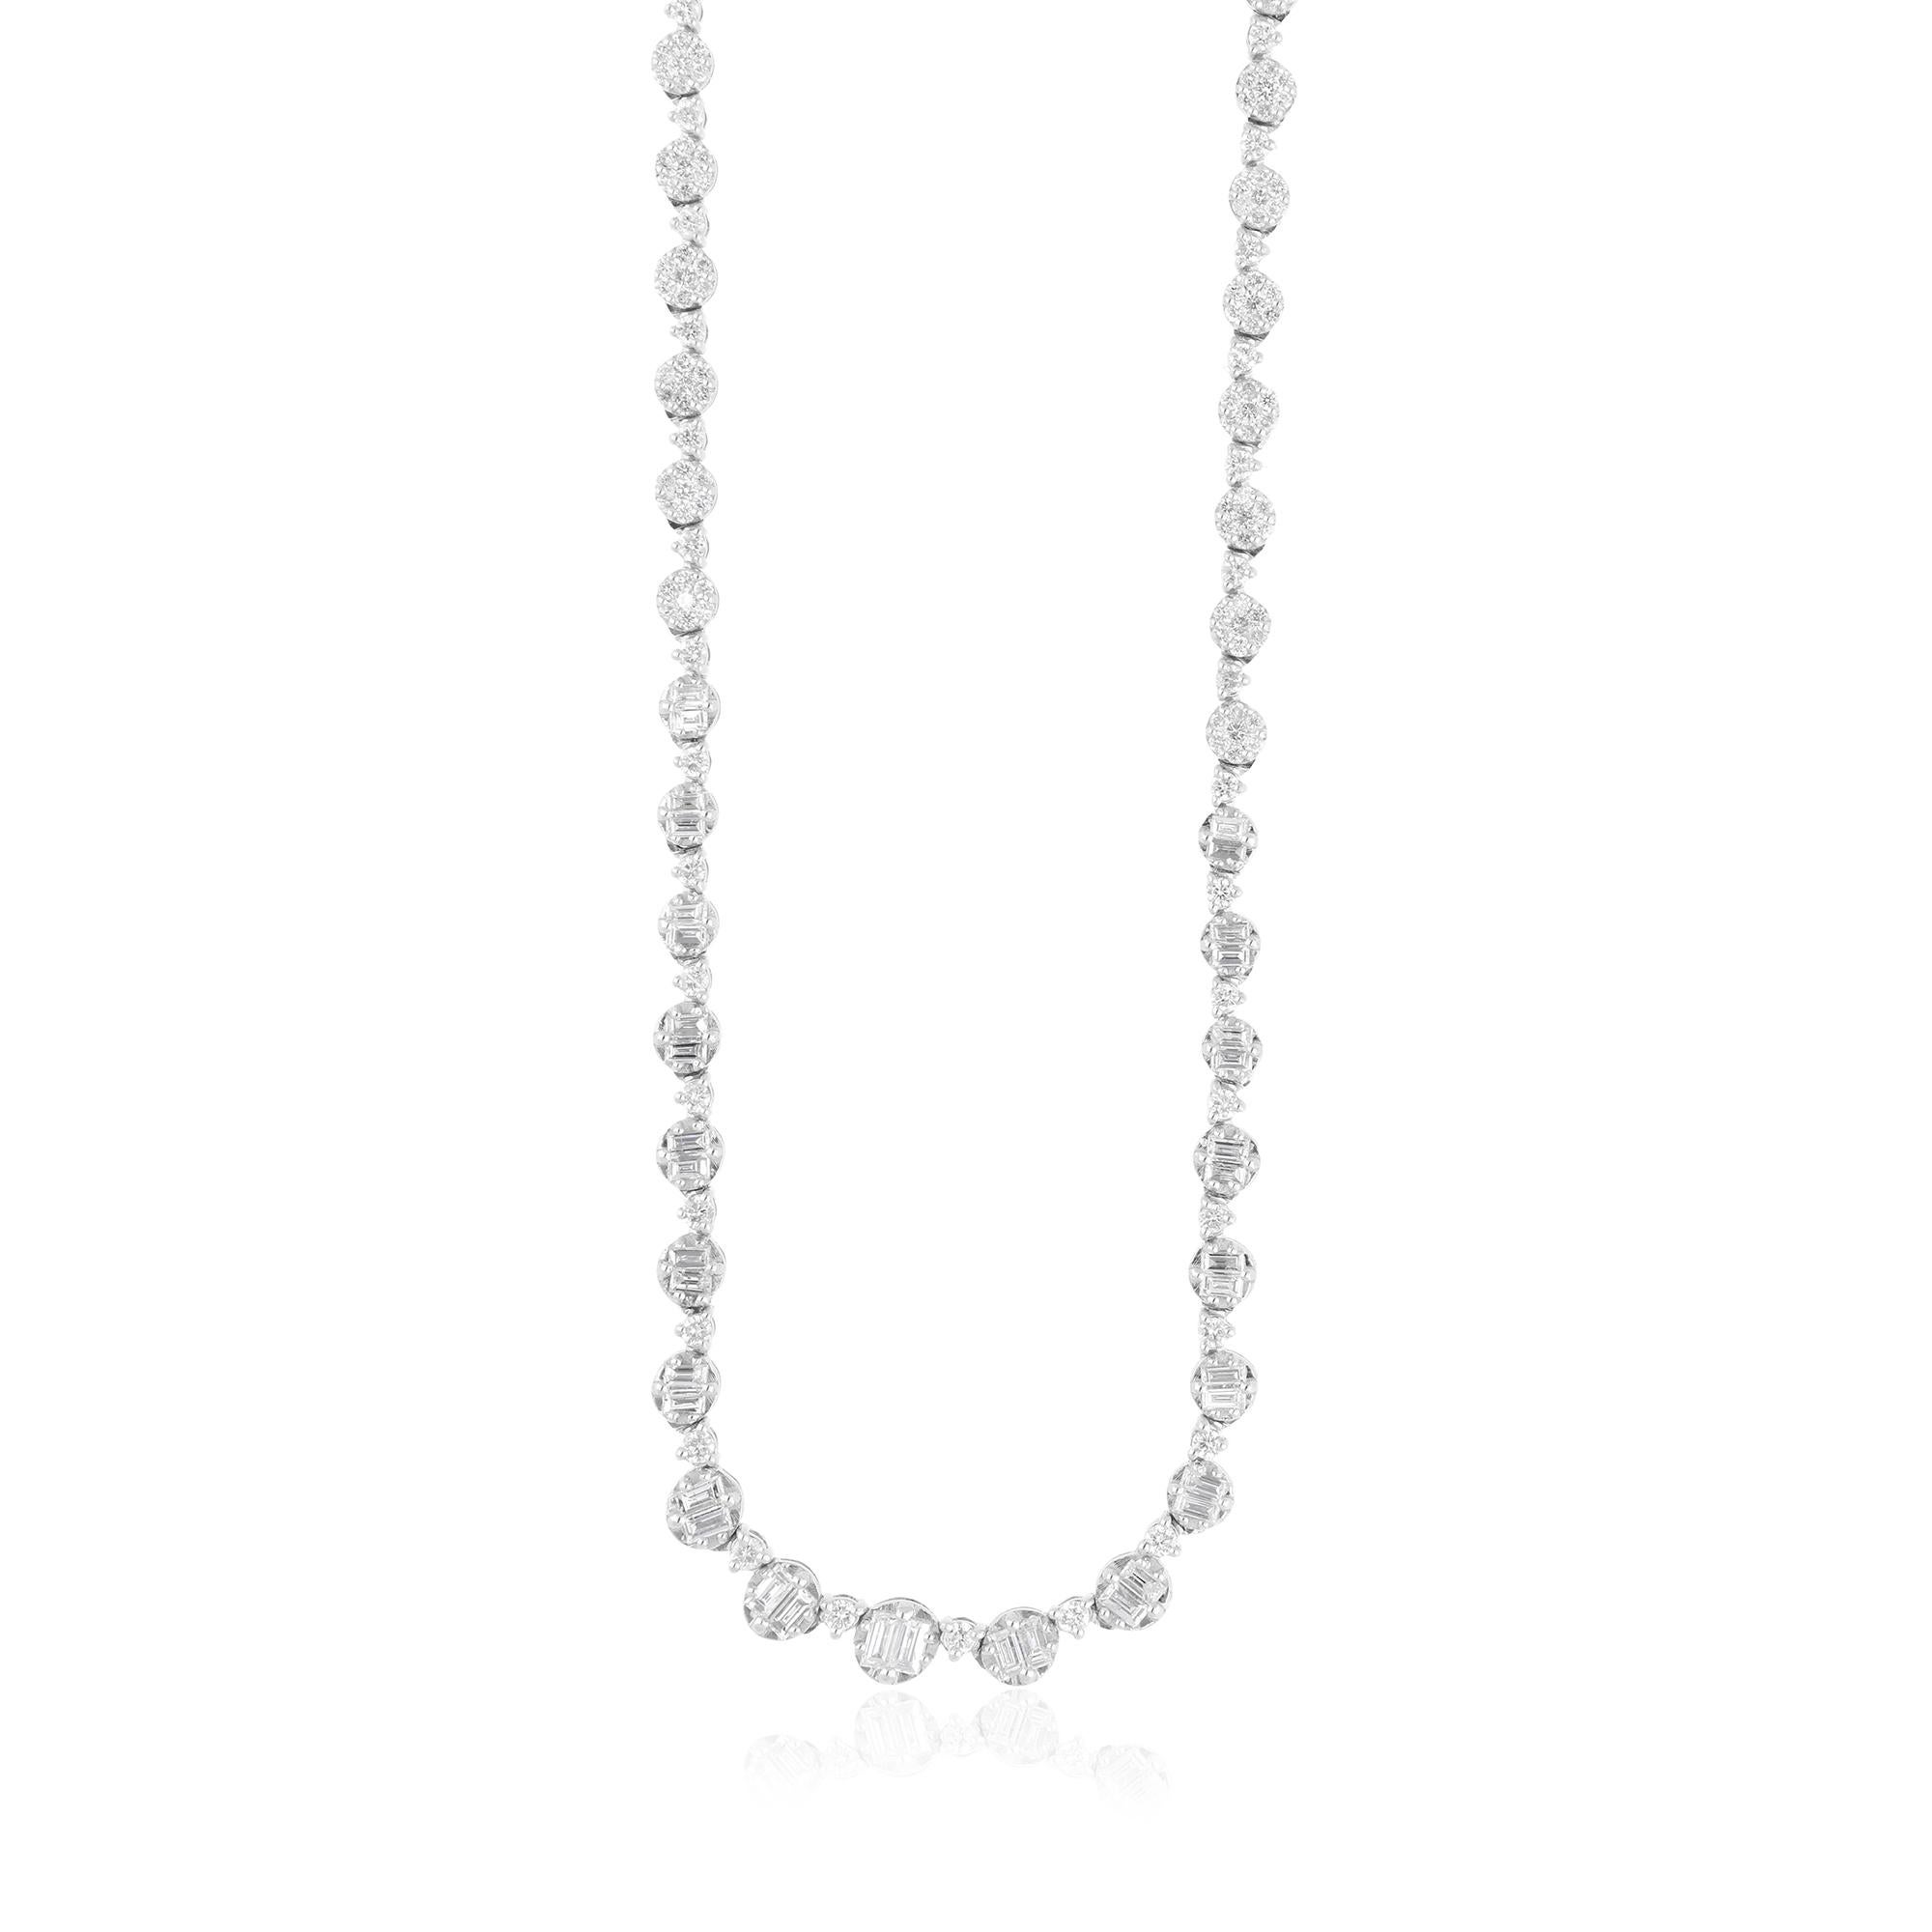 Indulge in the timeless elegance of this Natural SI Clarity HI Color Diamond Fine Necklace, a true statement piece crafted with meticulous attention to detail. Set in 14 karat white gold, this exquisite necklace exudes sophistication and